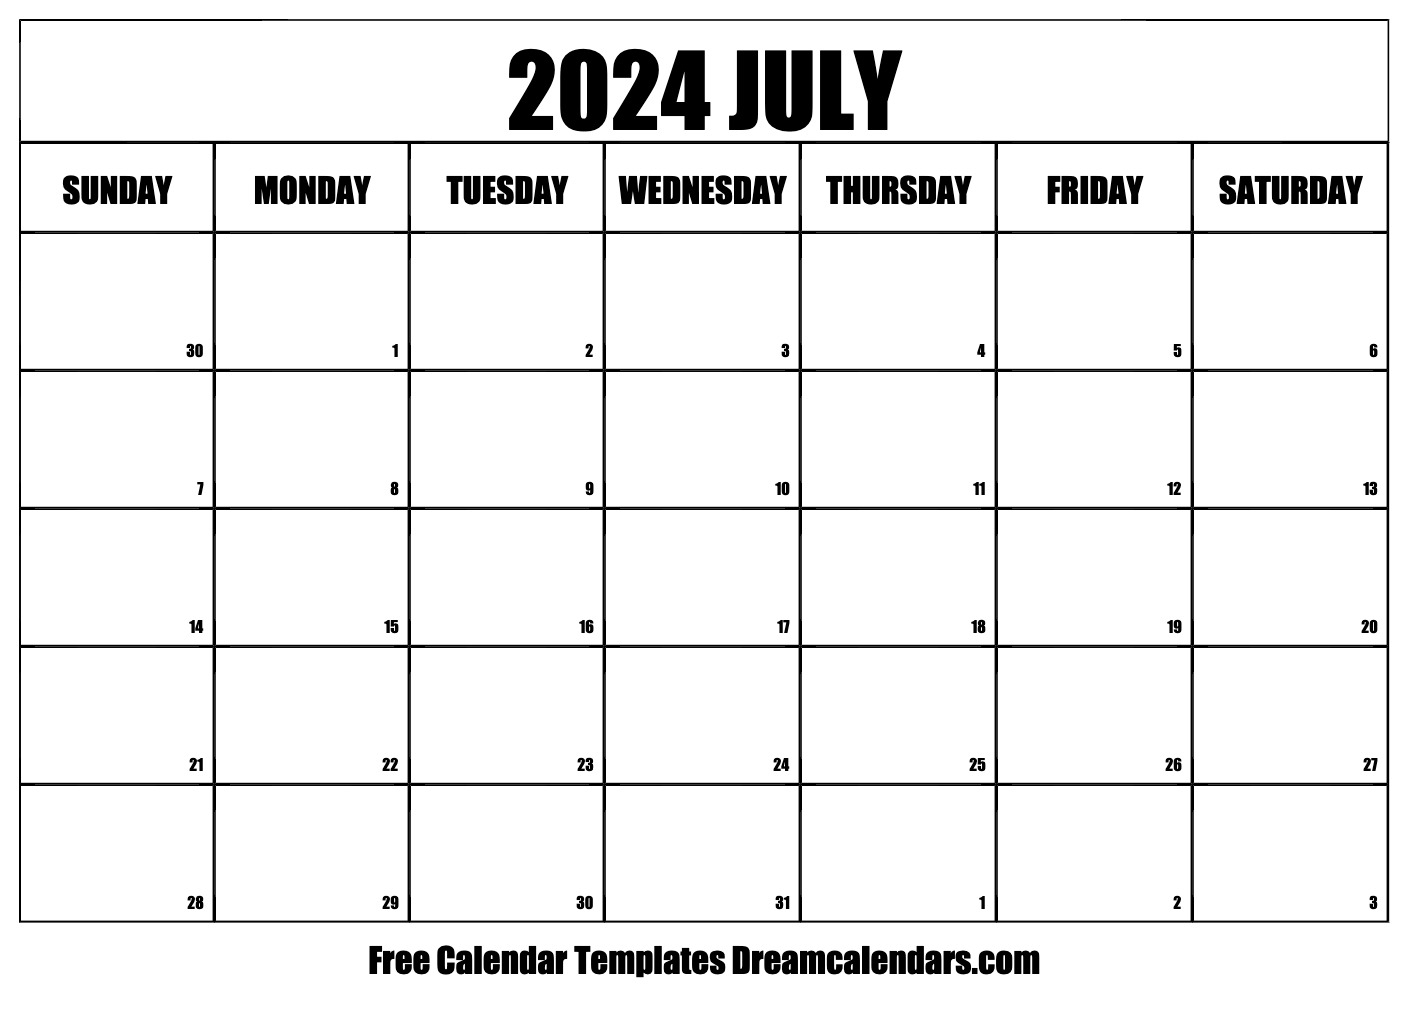 July 2024 Calendar | Free Blank Printable With Holidays for Free Printable Calendar July 2024 June 2024